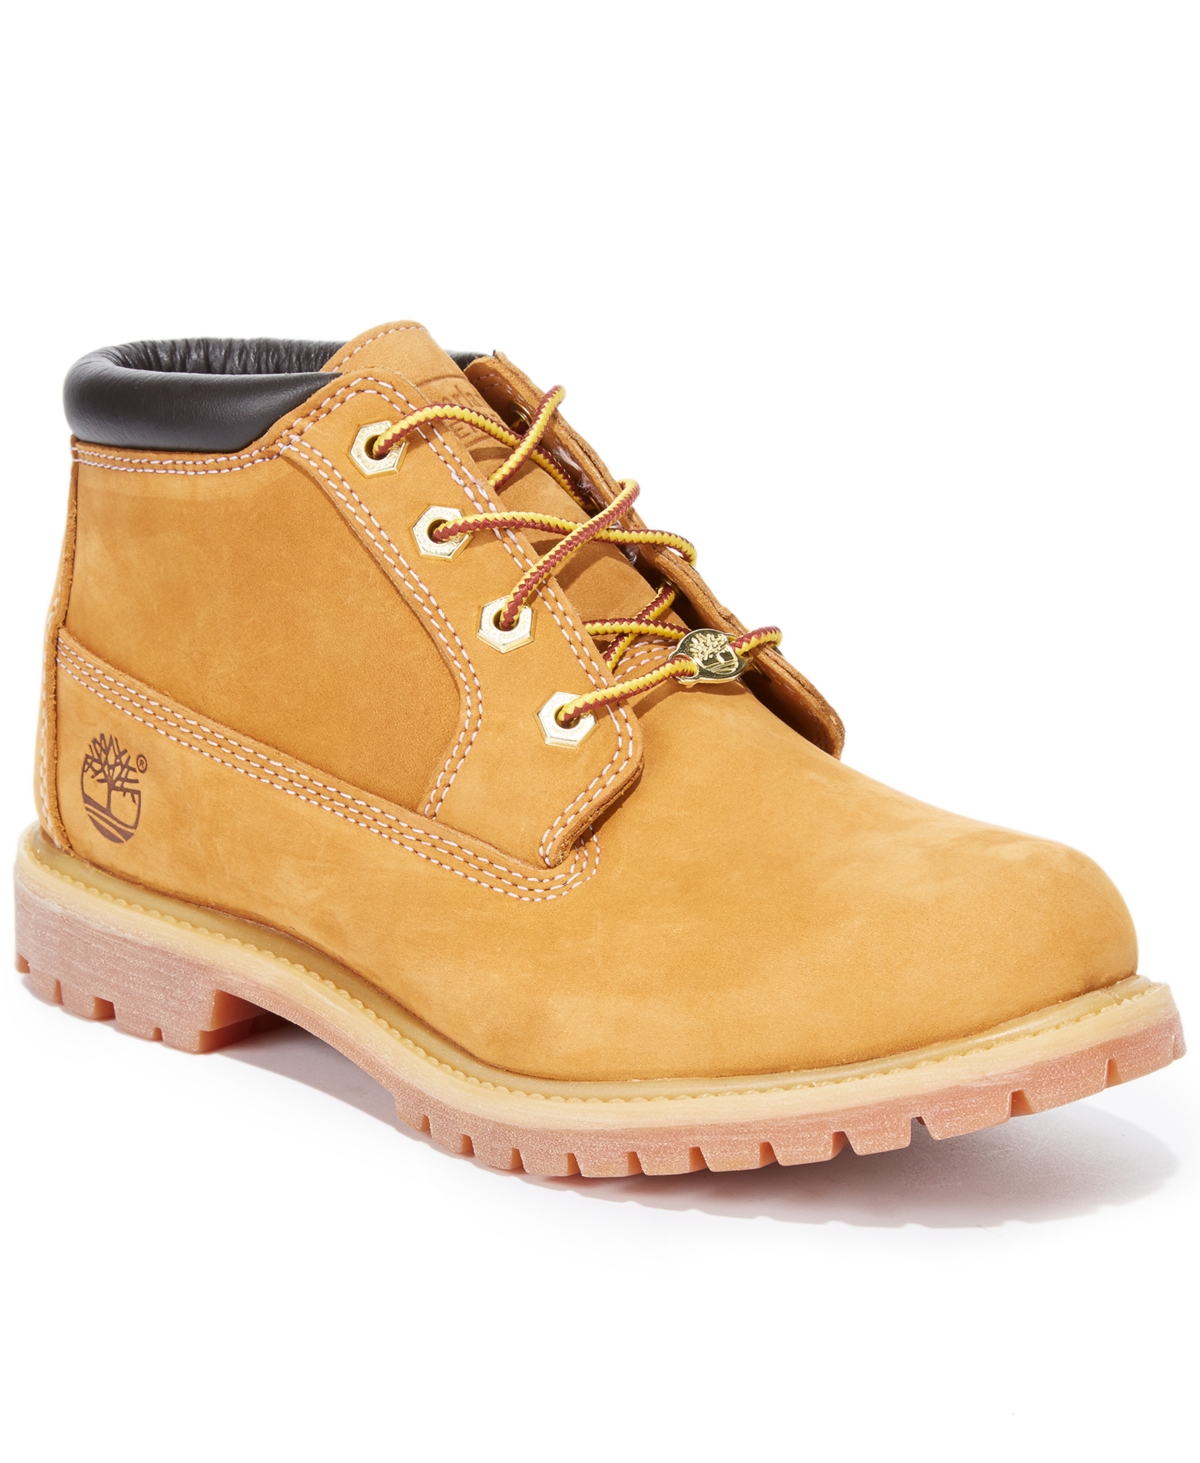 TIMBERLAND WOMEN'S NELLIE LACE UP UTILITY WATERPROOF LUG SOLE BOOTS WOMEN'S SHOES